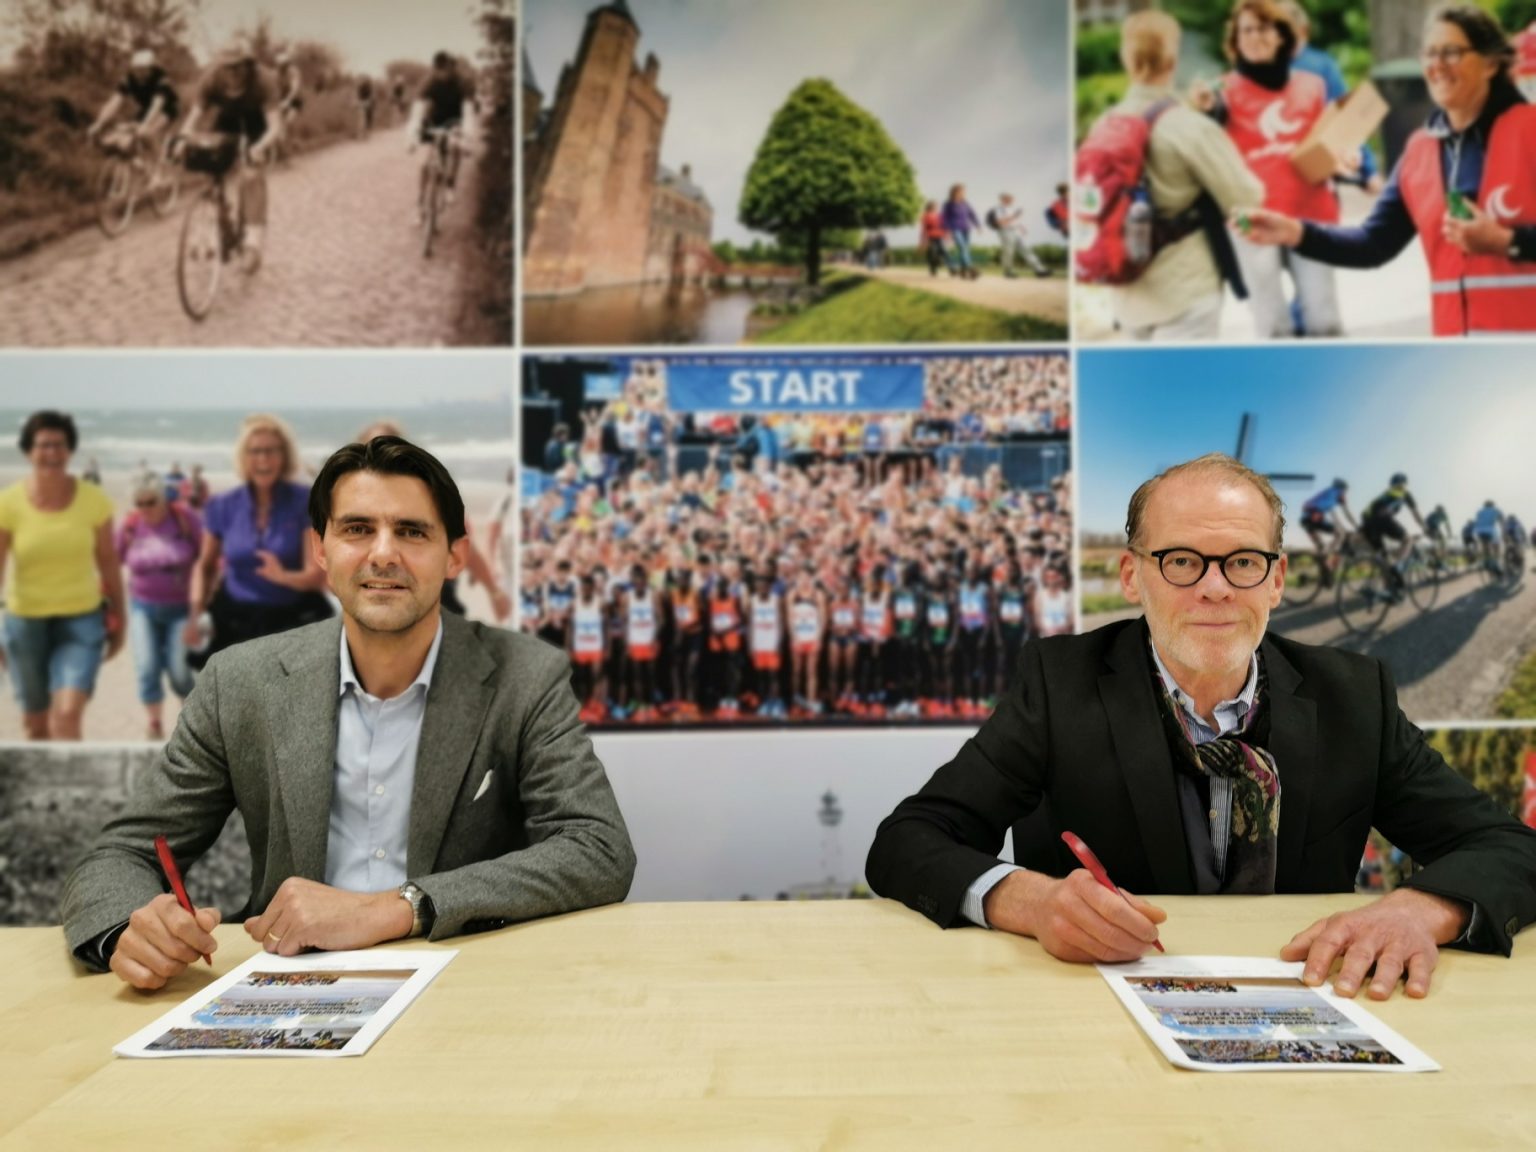 MYLAPS and Le Champion extend partnership